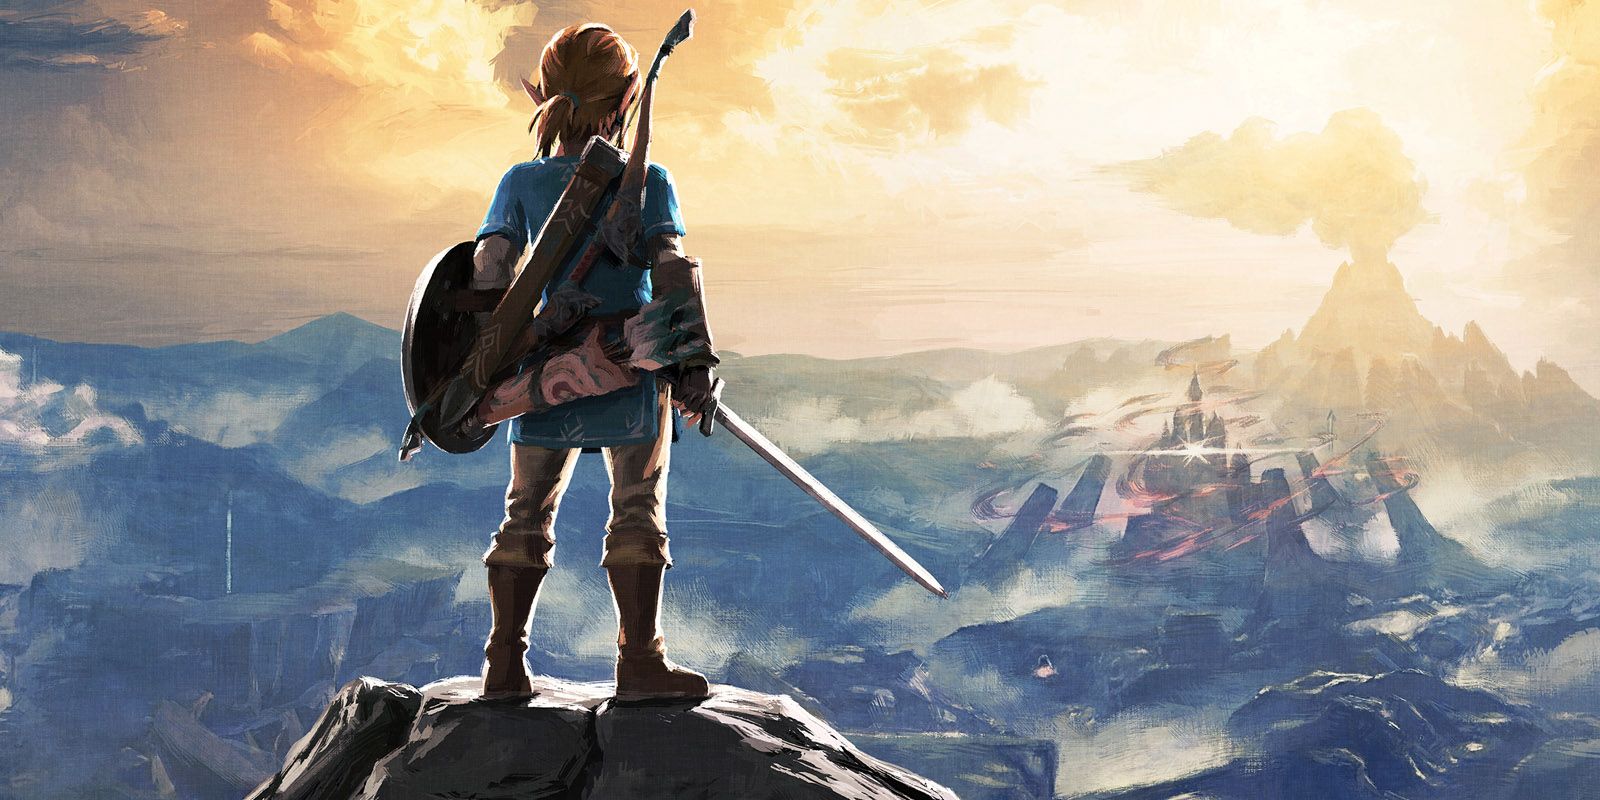 Picture of Link overlooking the open world skyline